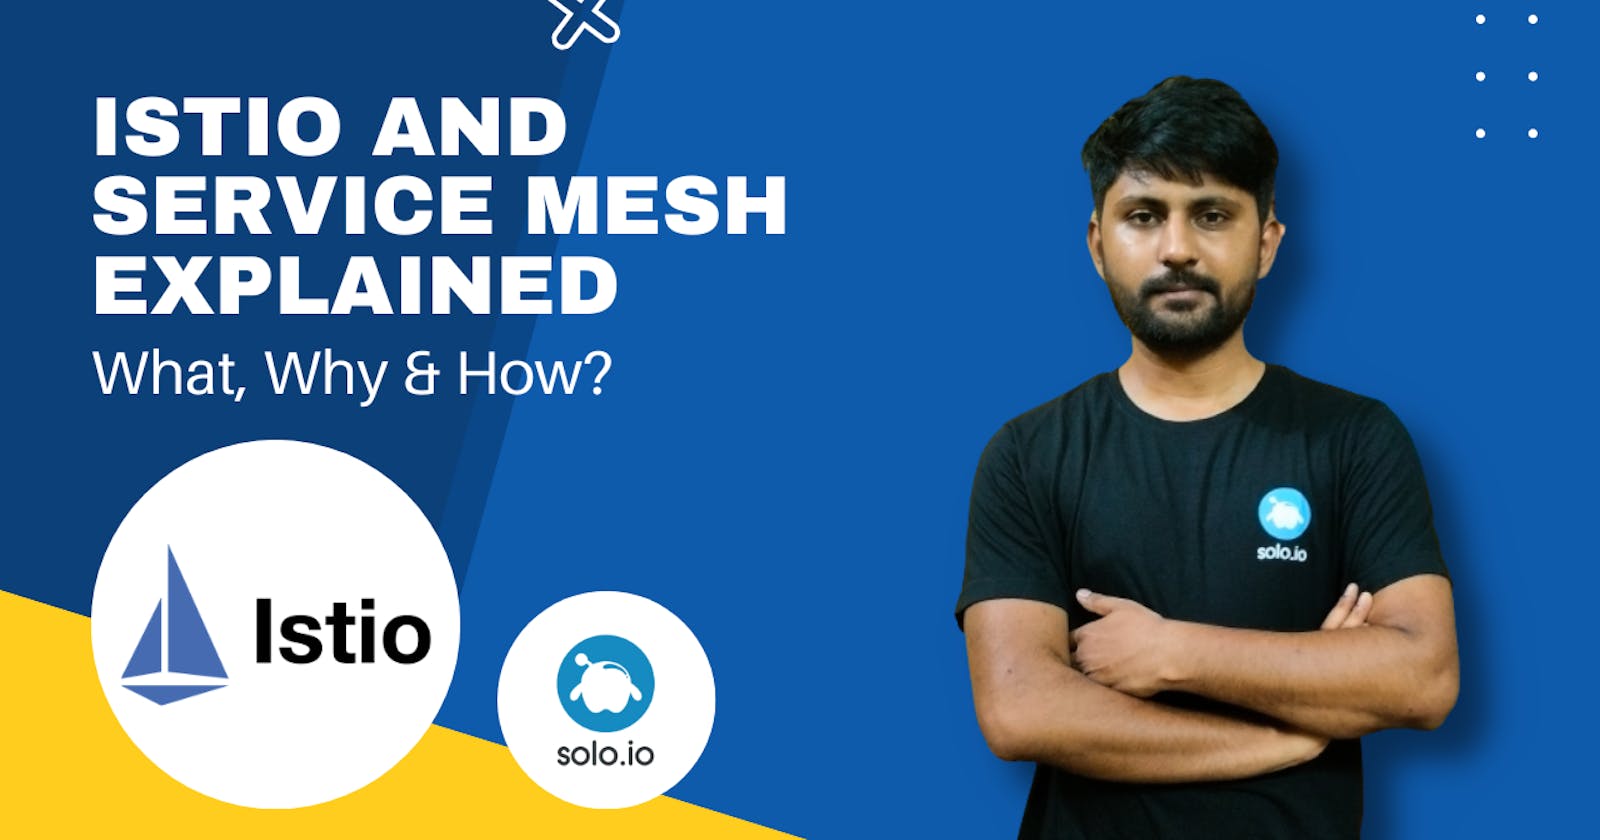 Istio and Service mesh explained - What, Why & How?